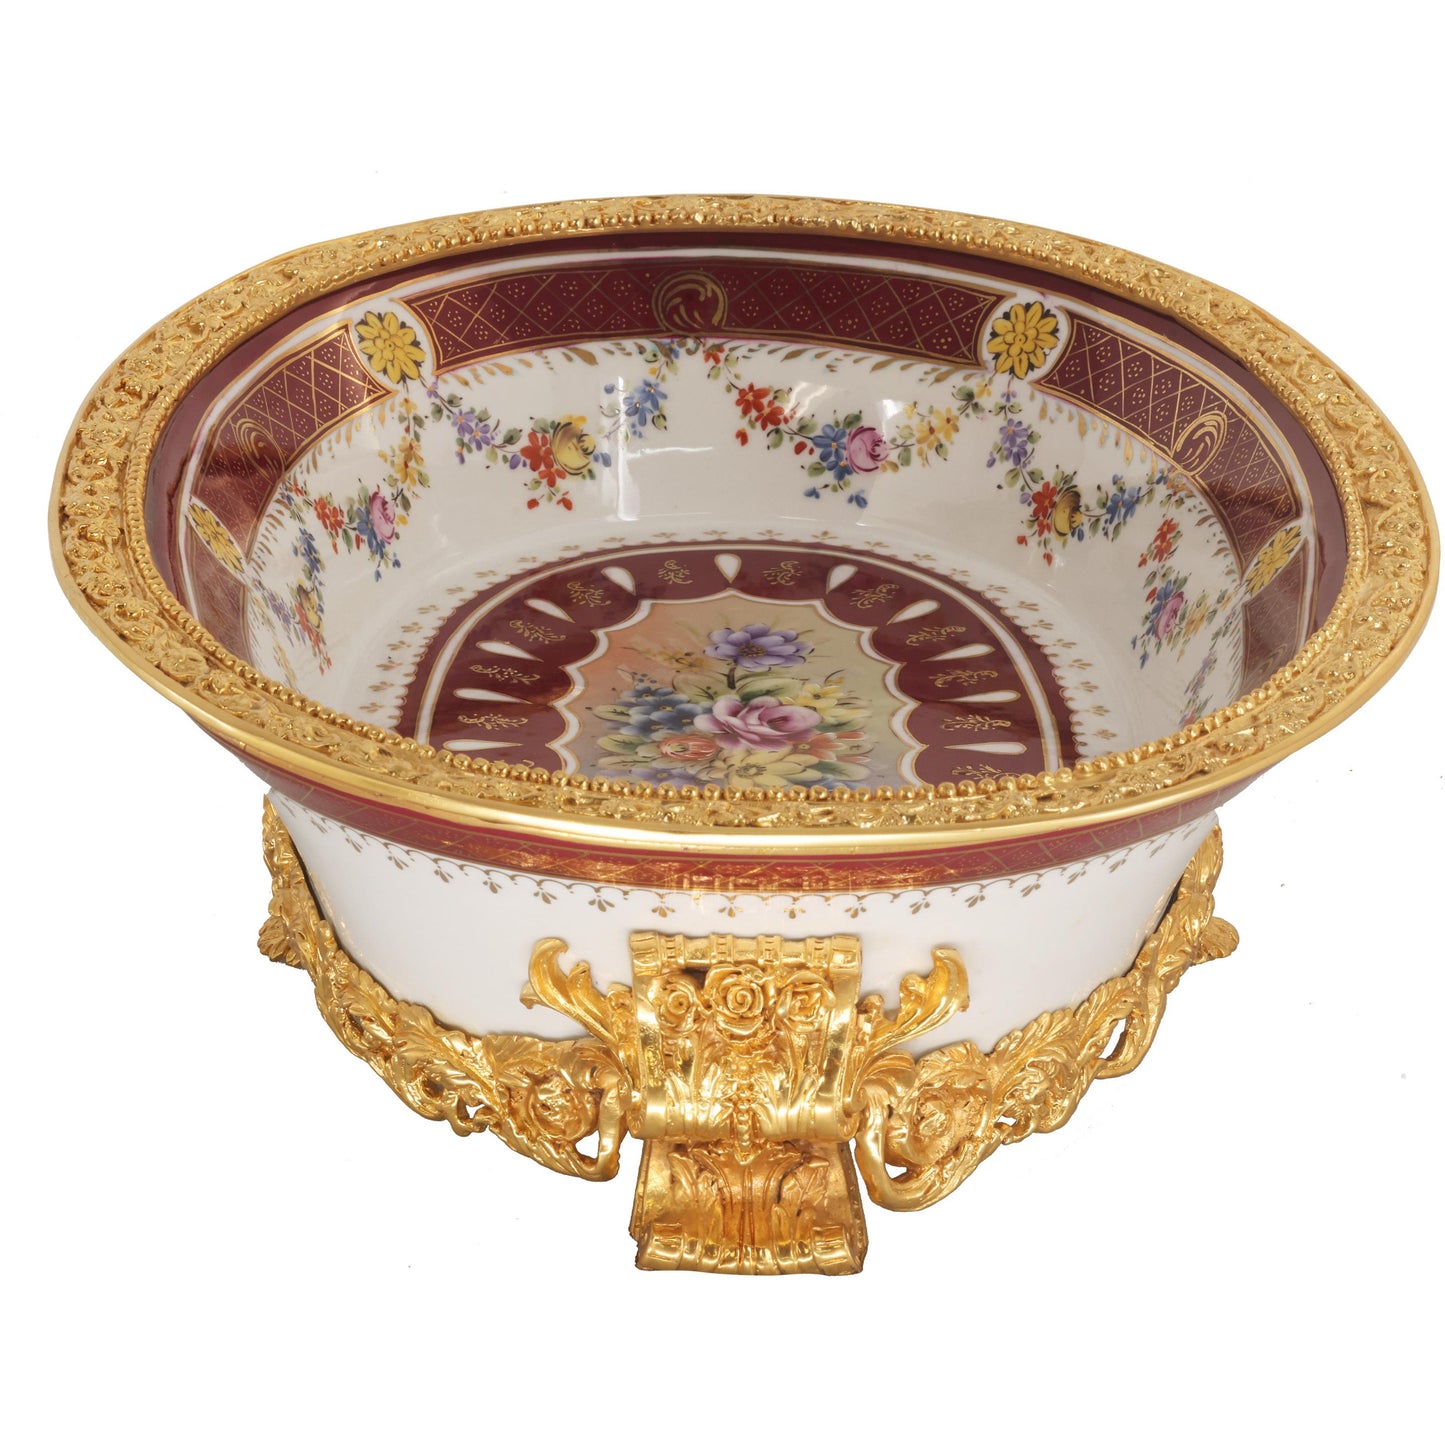 Hand-painted Rococo Porcelain and Bronze Serving Dish